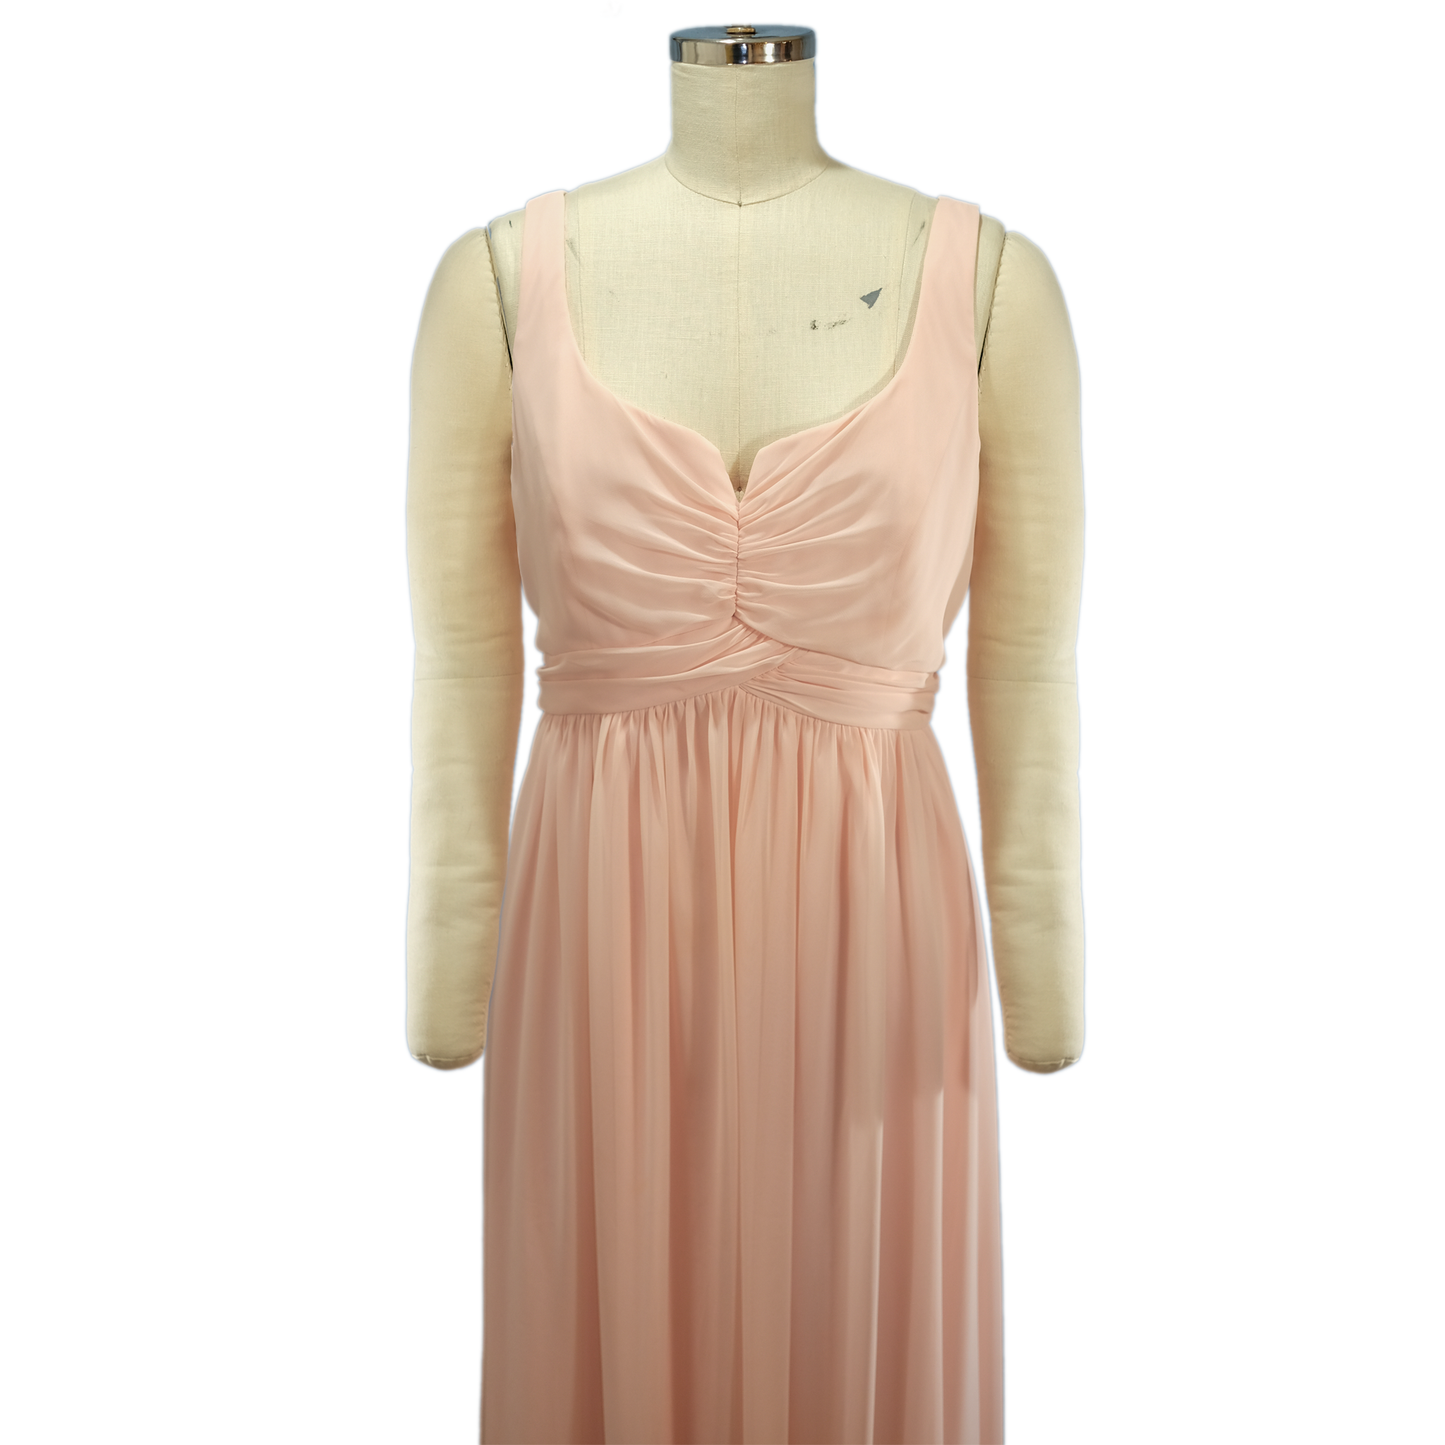 Dessy Collection Blush Pink Chiffon Gown - Size 14 - Pre-Owned